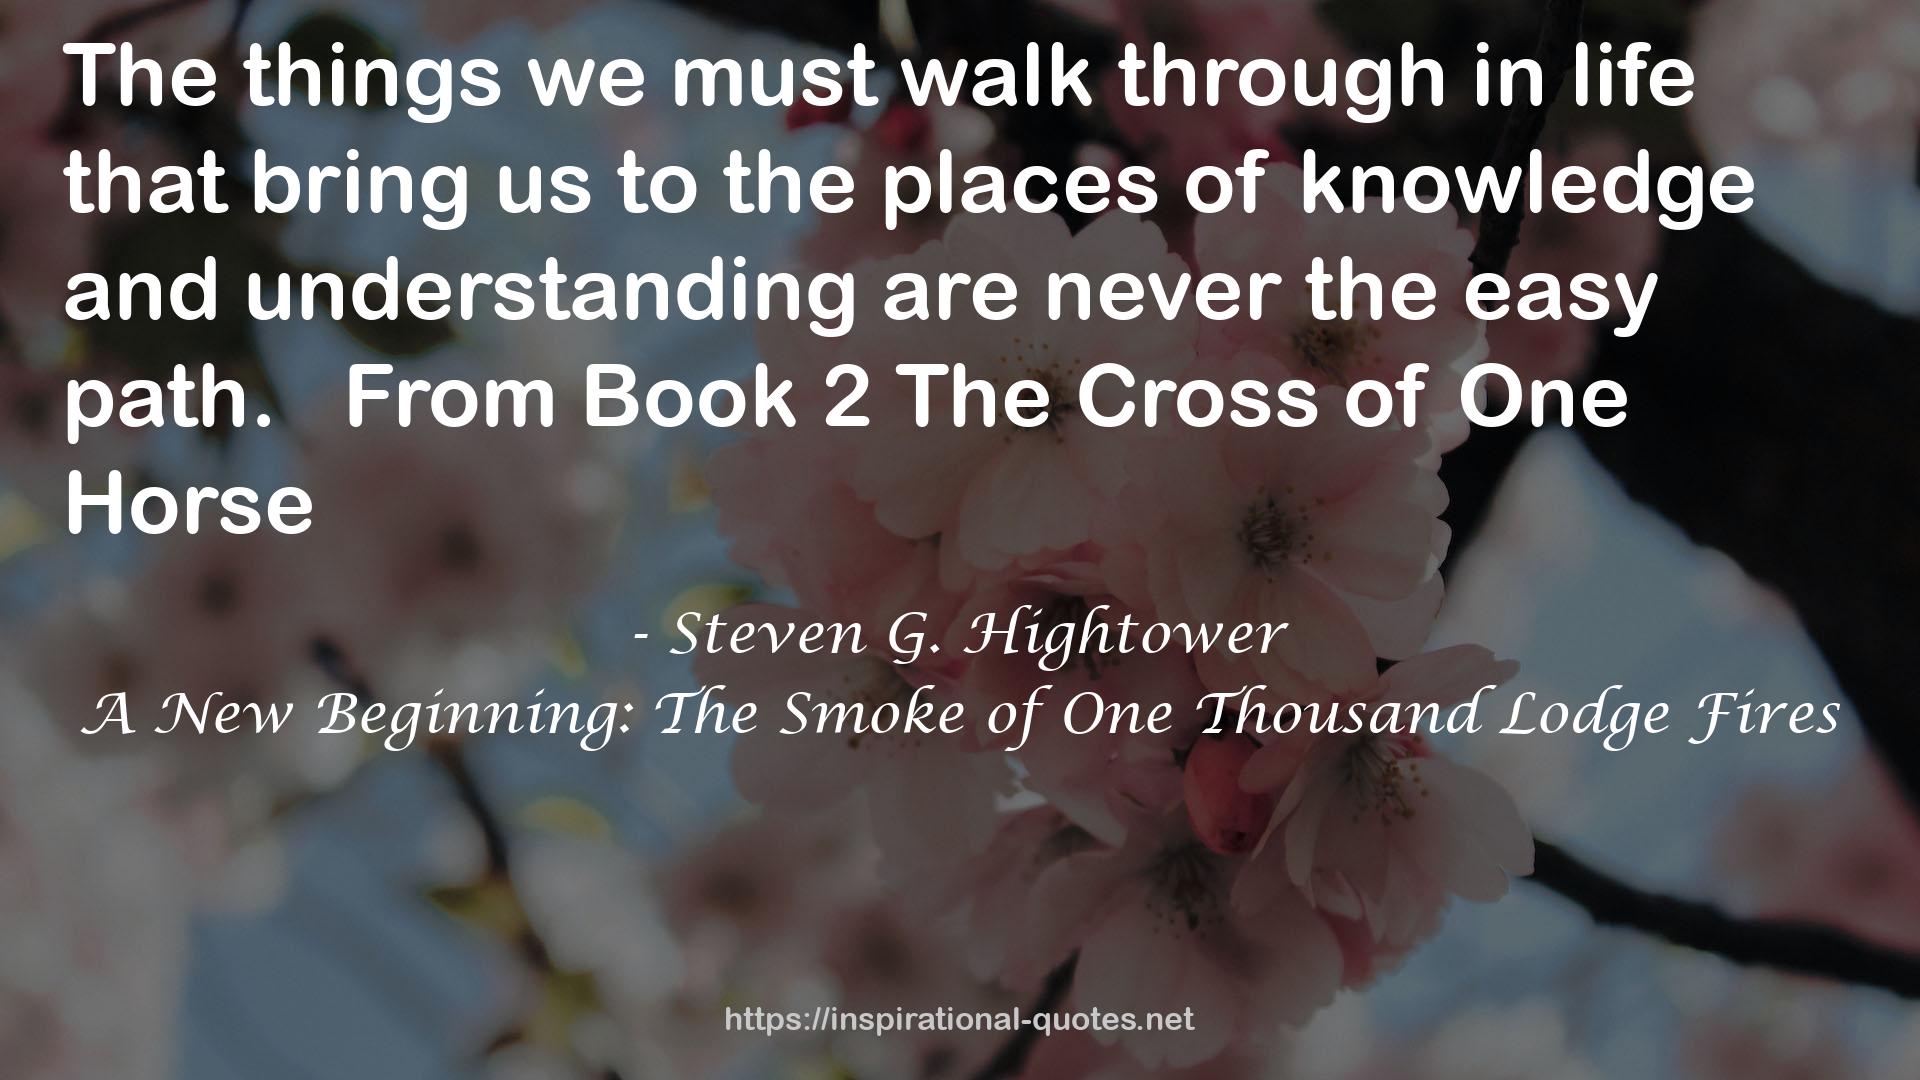 A New Beginning: The Smoke of One Thousand Lodge Fires QUOTES